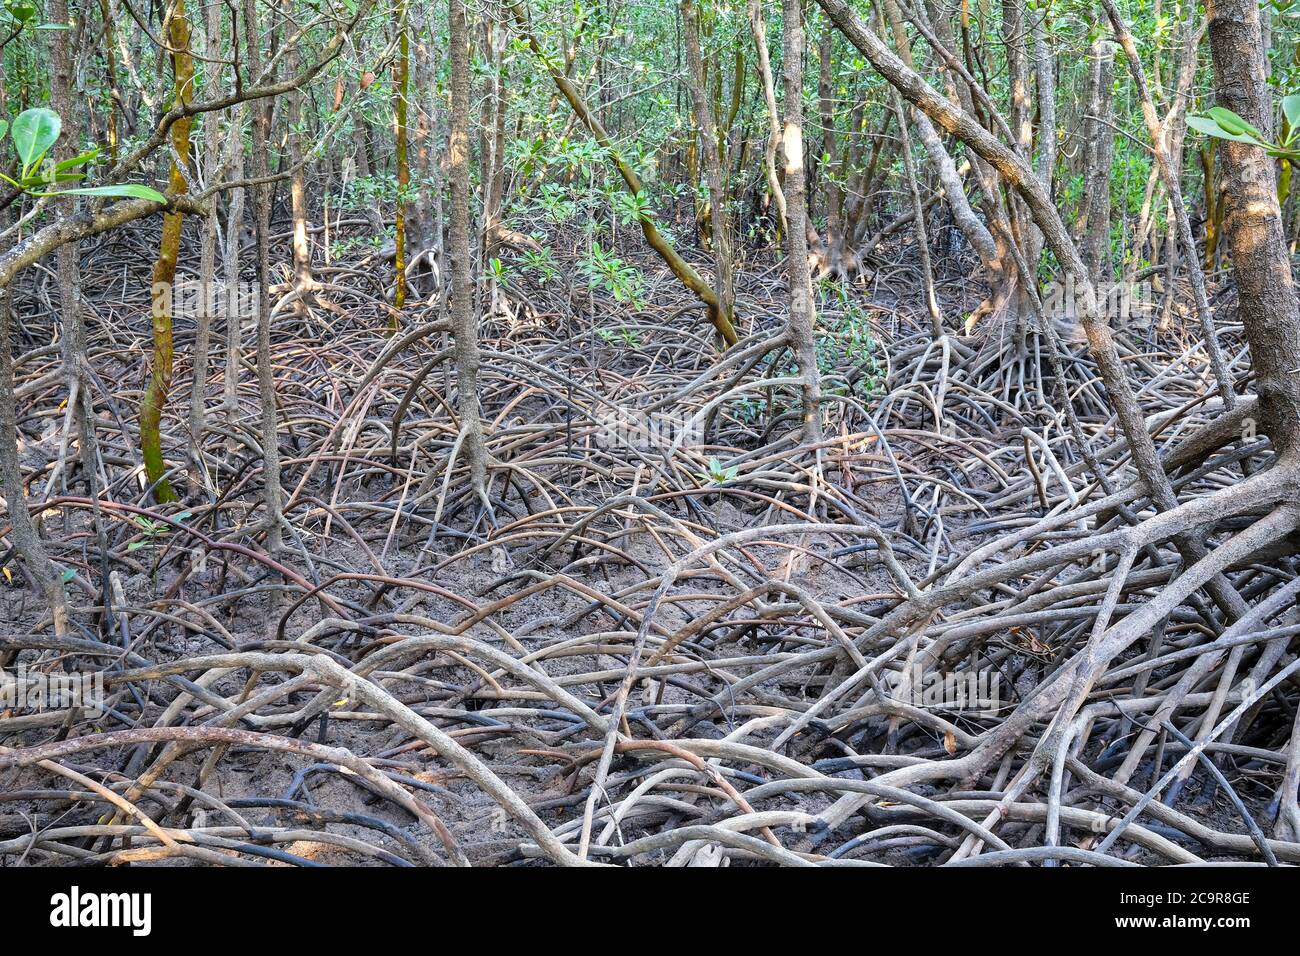 Mangrove forest and mangrove roots at low tide, near Darwin, Northern Territory, Australia Stock Photo